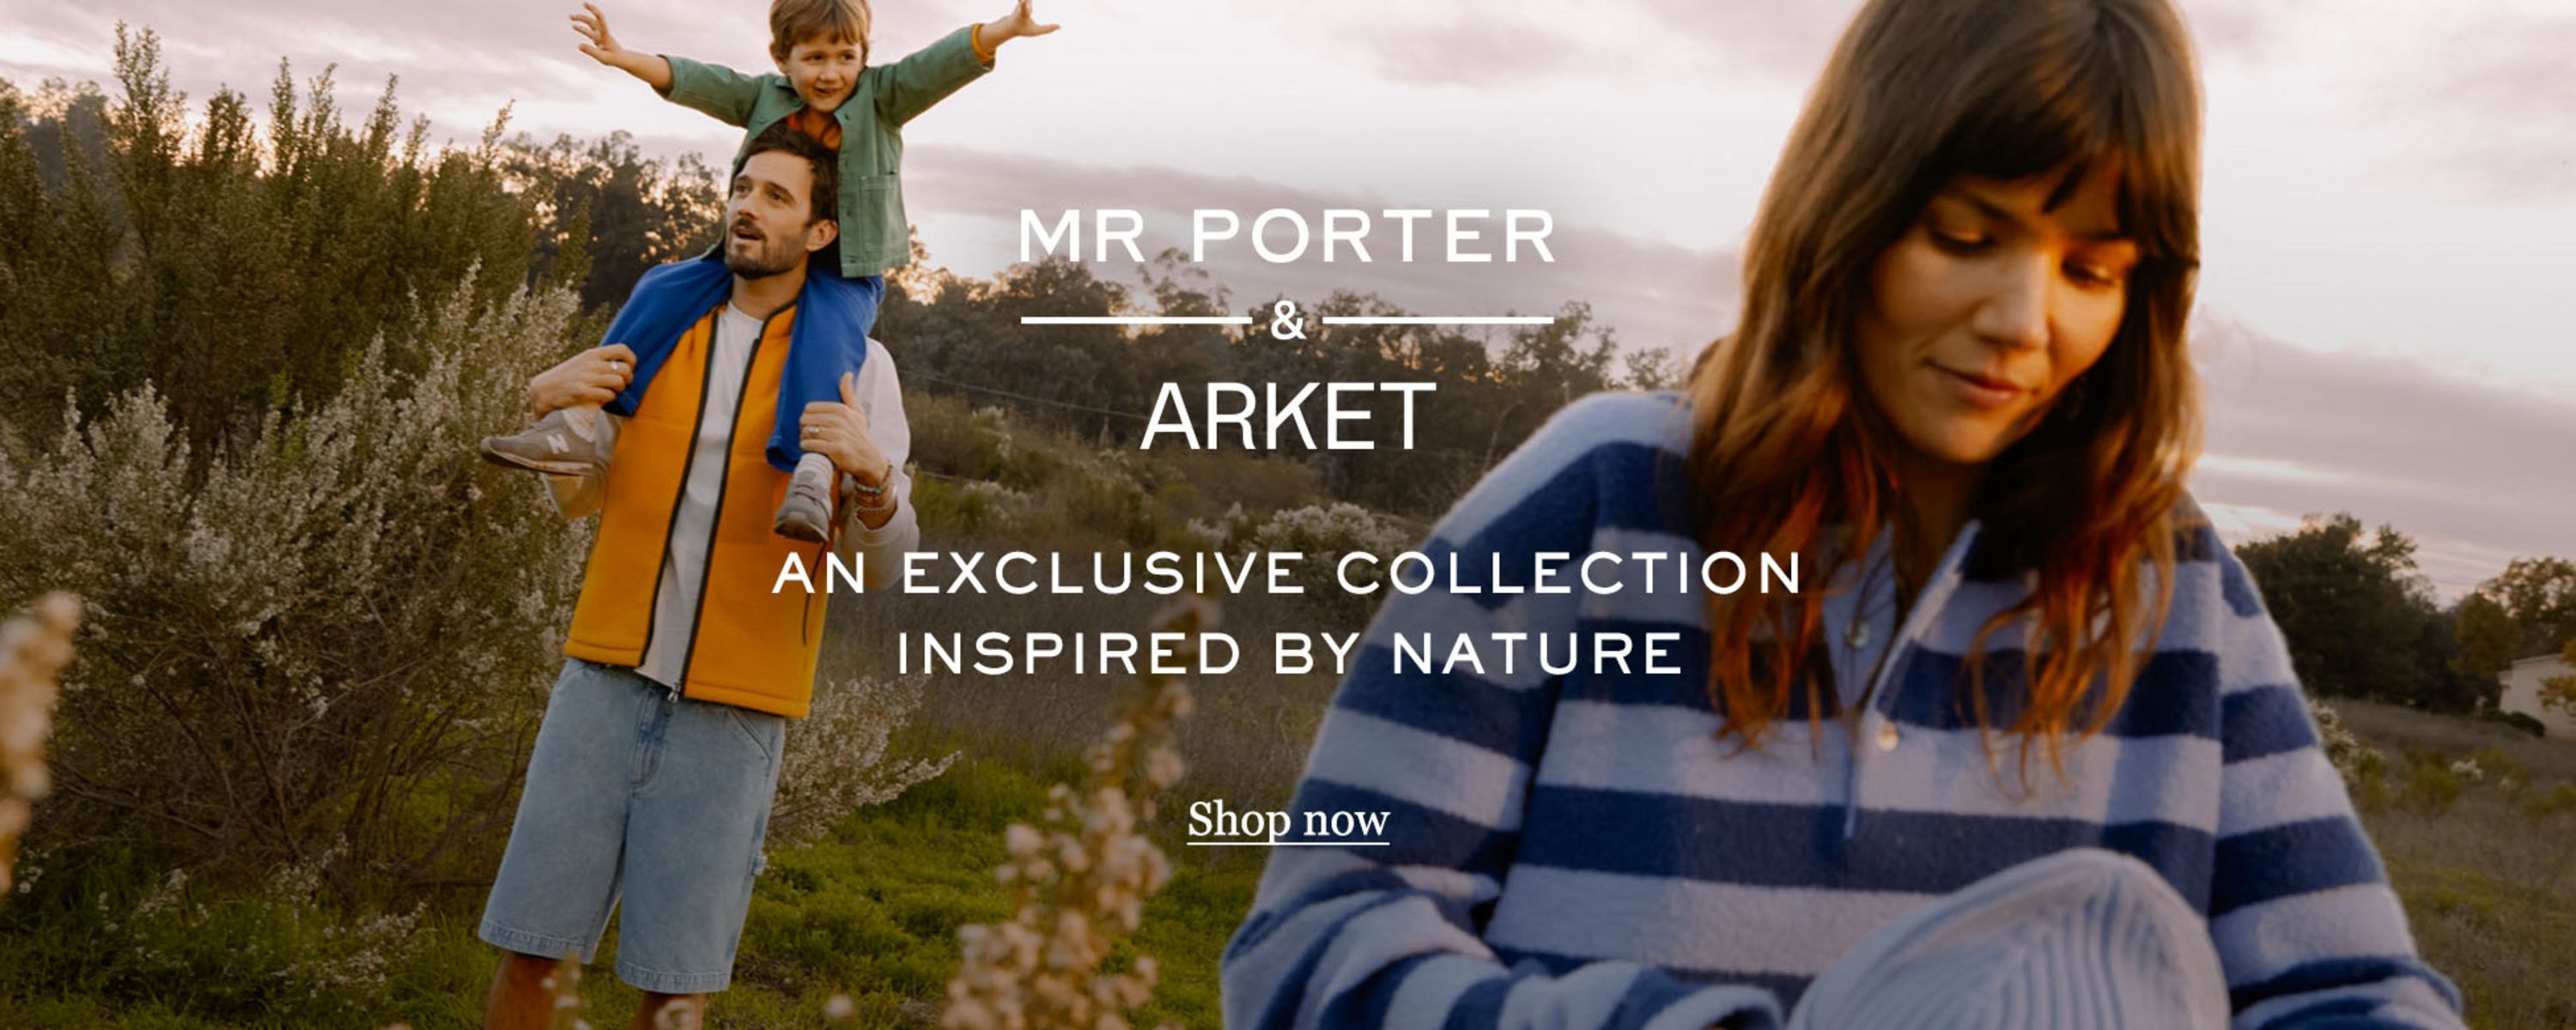 Step into Nature with ARKET x MR PORTER’s New Collection